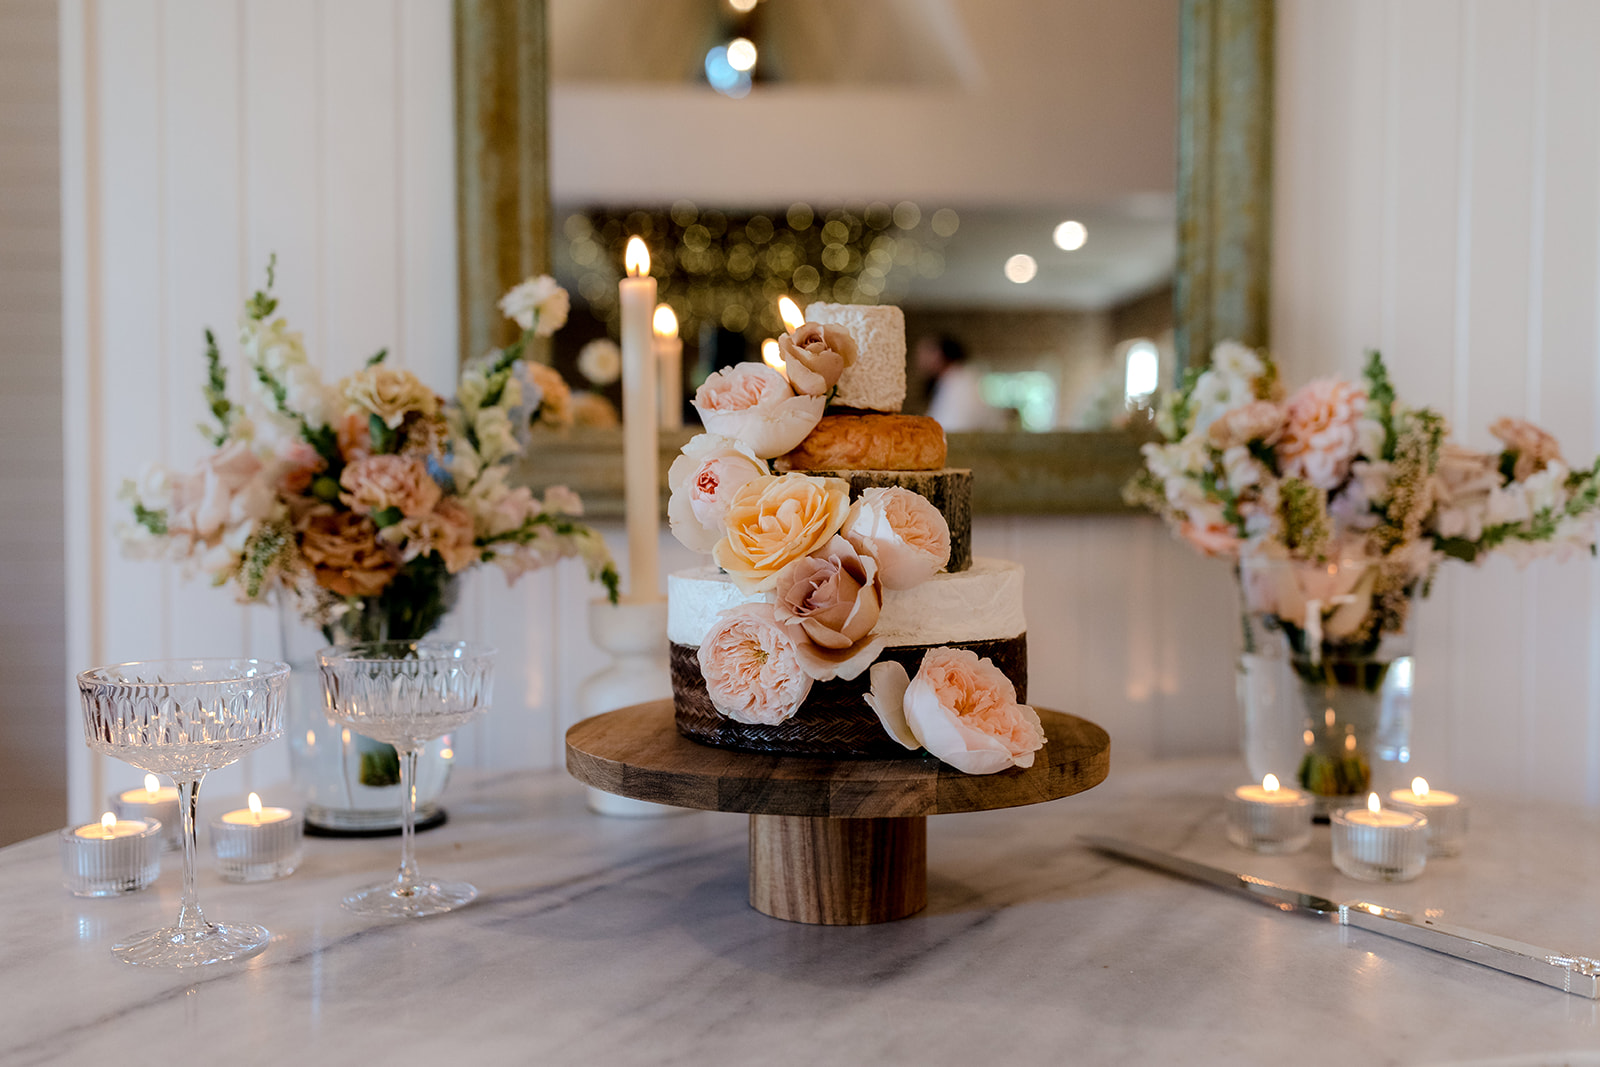 Romantic spring-inspired wedding cake for an elegant country wedding at Montrose House.